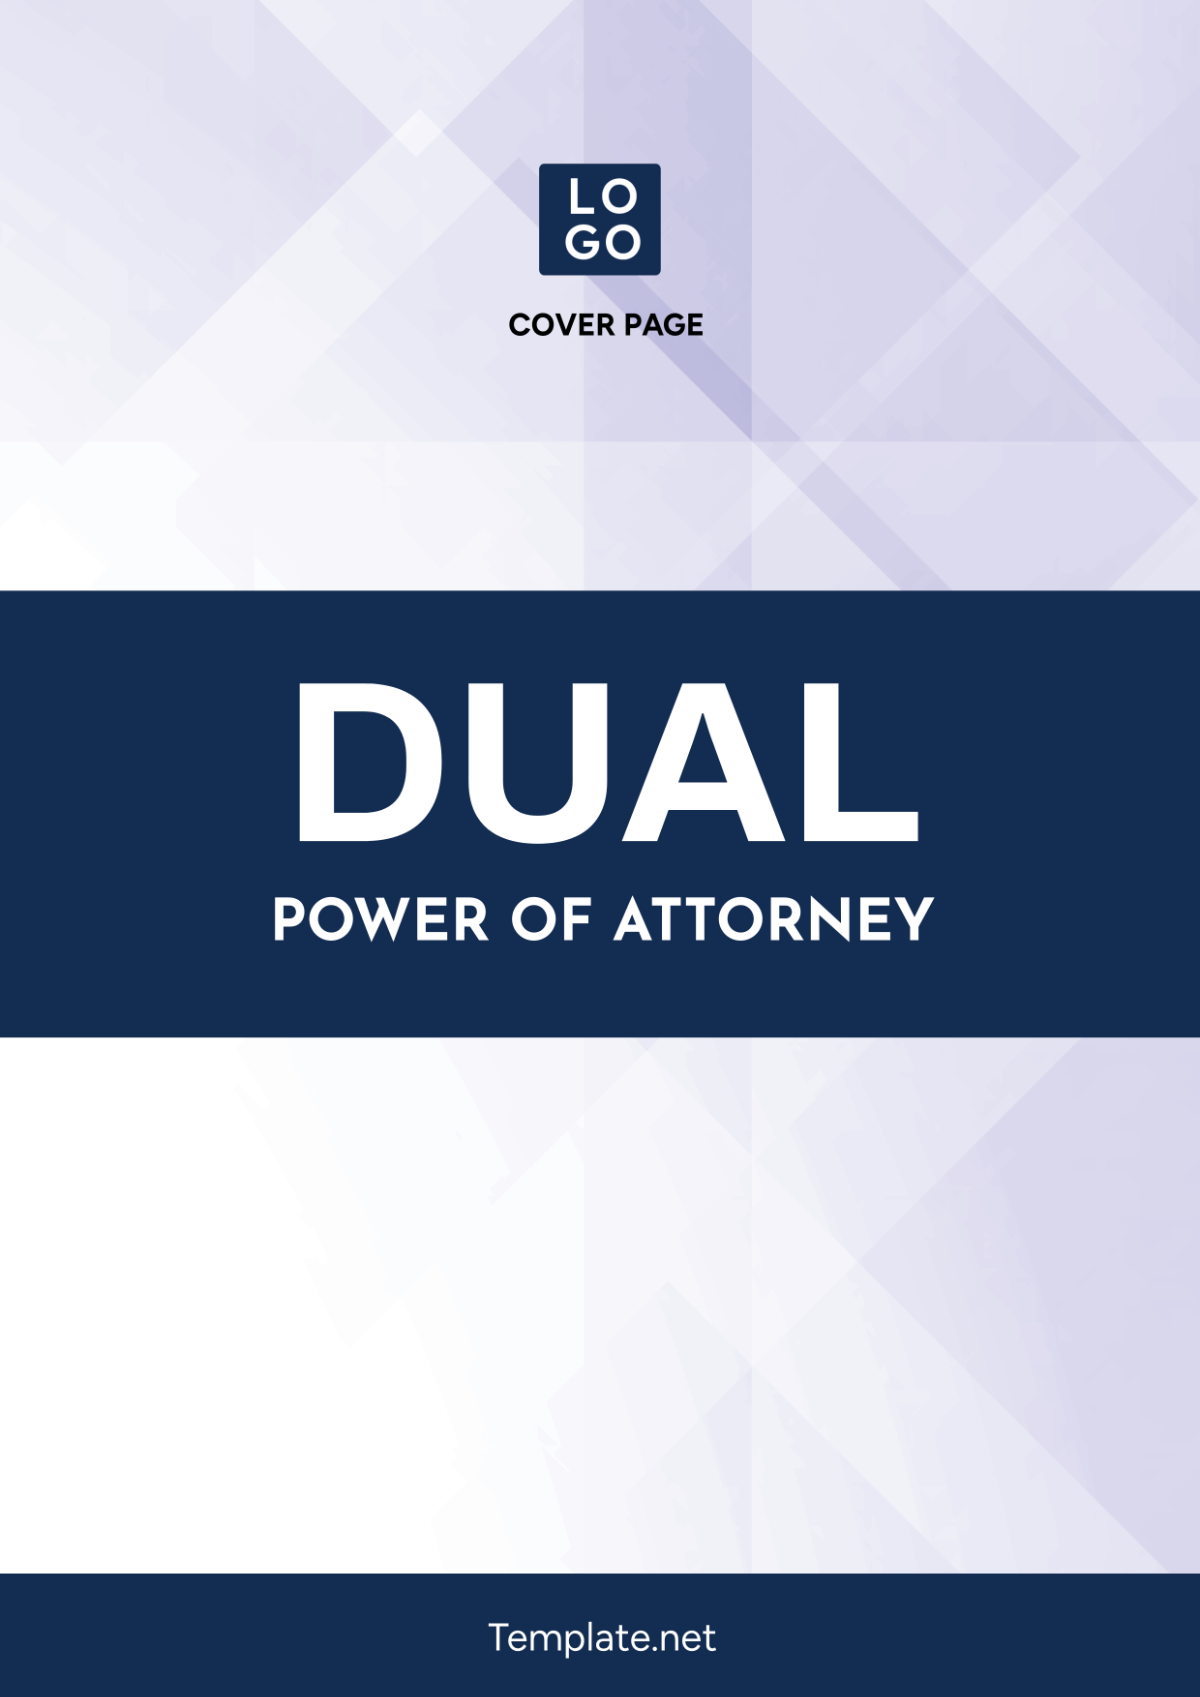 Dual Power of Attorney Cover Page